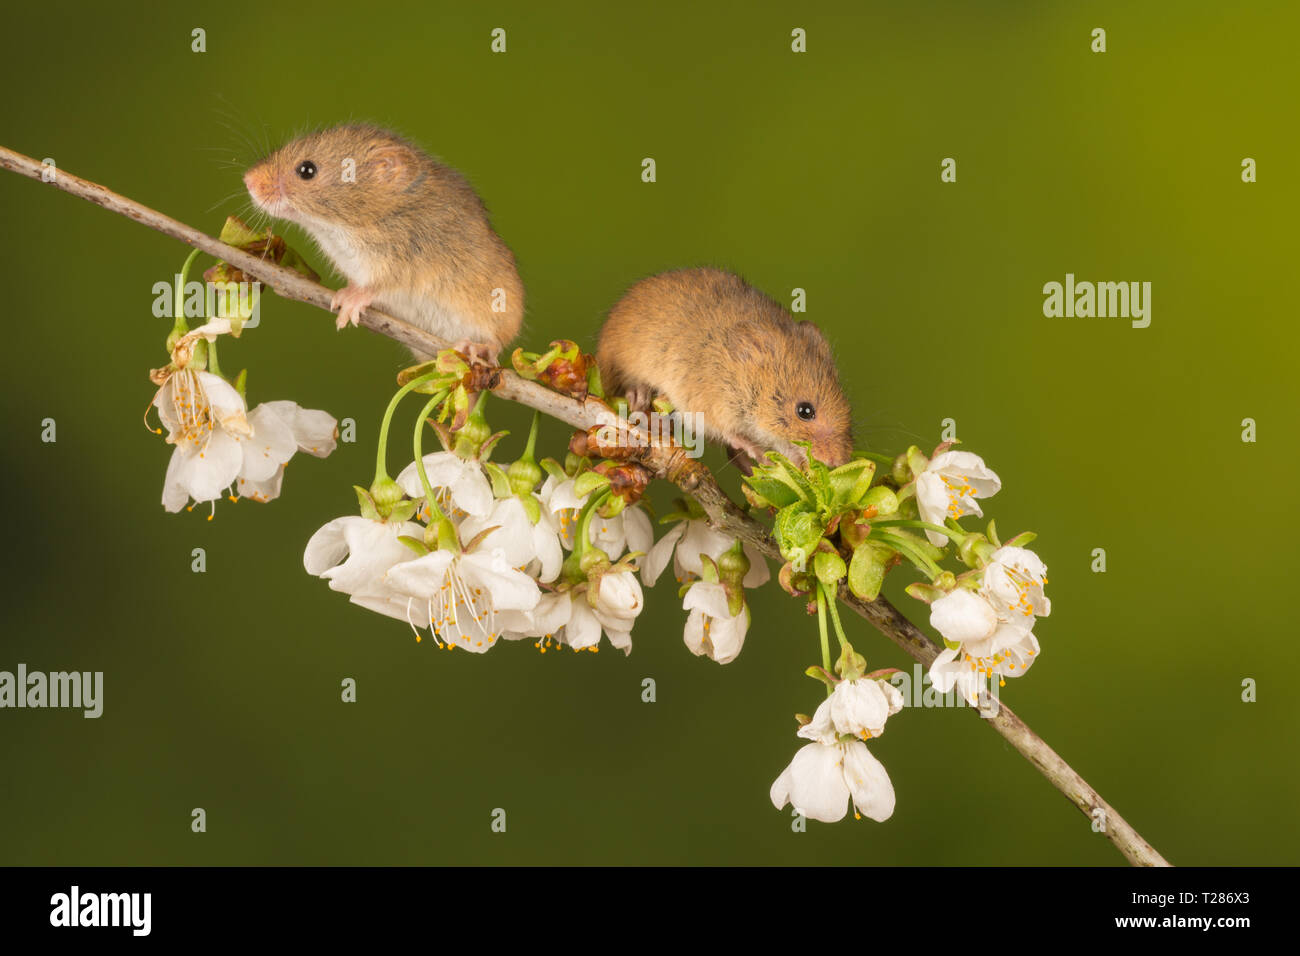 Two harvest mice (Micromys minutus), a small mammal or rodent species on branch with white blossom. Cute animal. Stock Photo